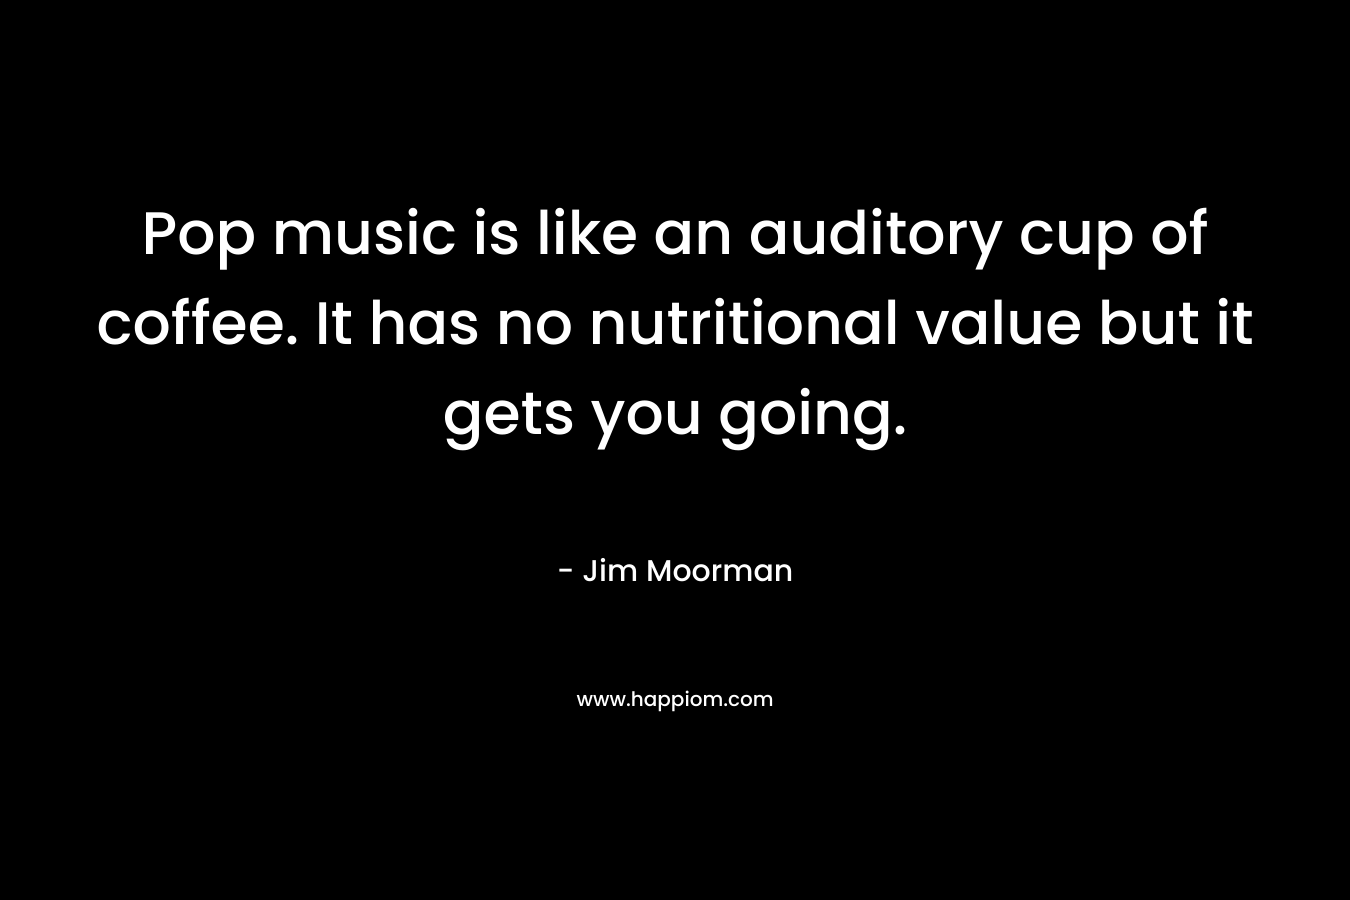 Pop music is like an auditory cup of coffee. It has no nutritional value but it gets you going. – Jim Moorman